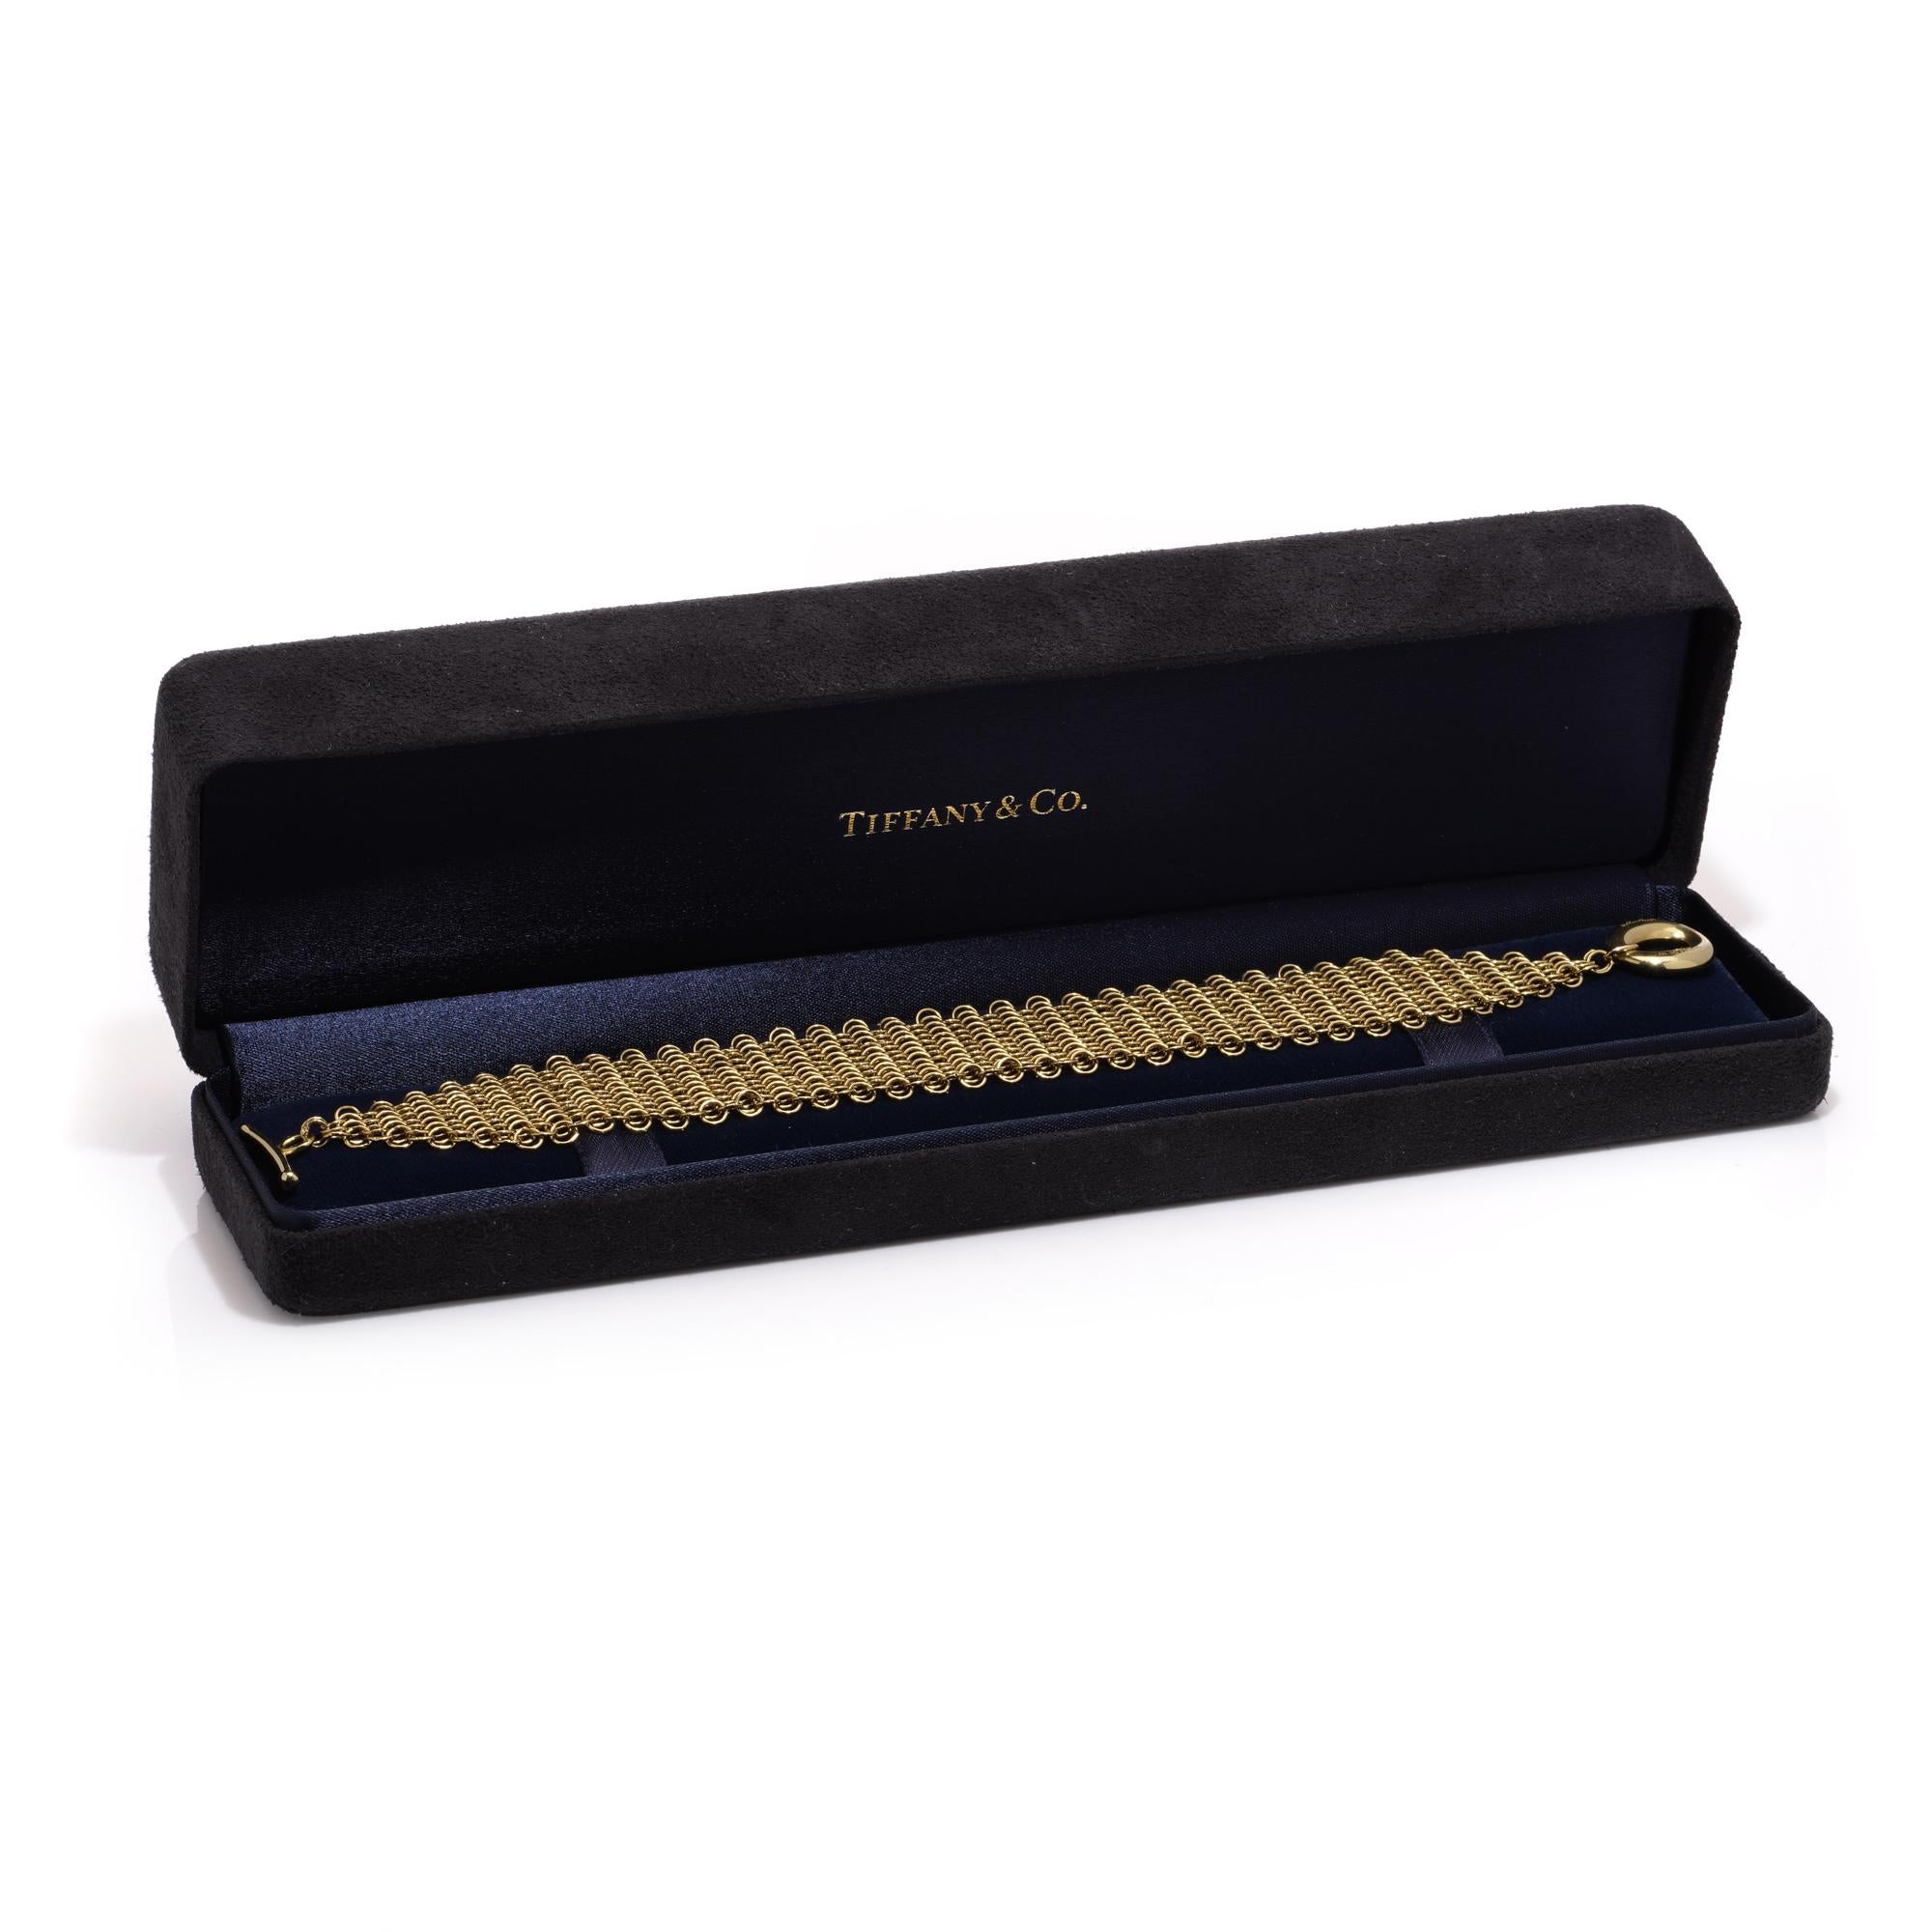 Tiffany & Co. 18kt. yellow gold multi-strand mesh bracelet designed by Elsa Peretti.
Made in 1990s.
The clasp of the bracelet bears the marks 